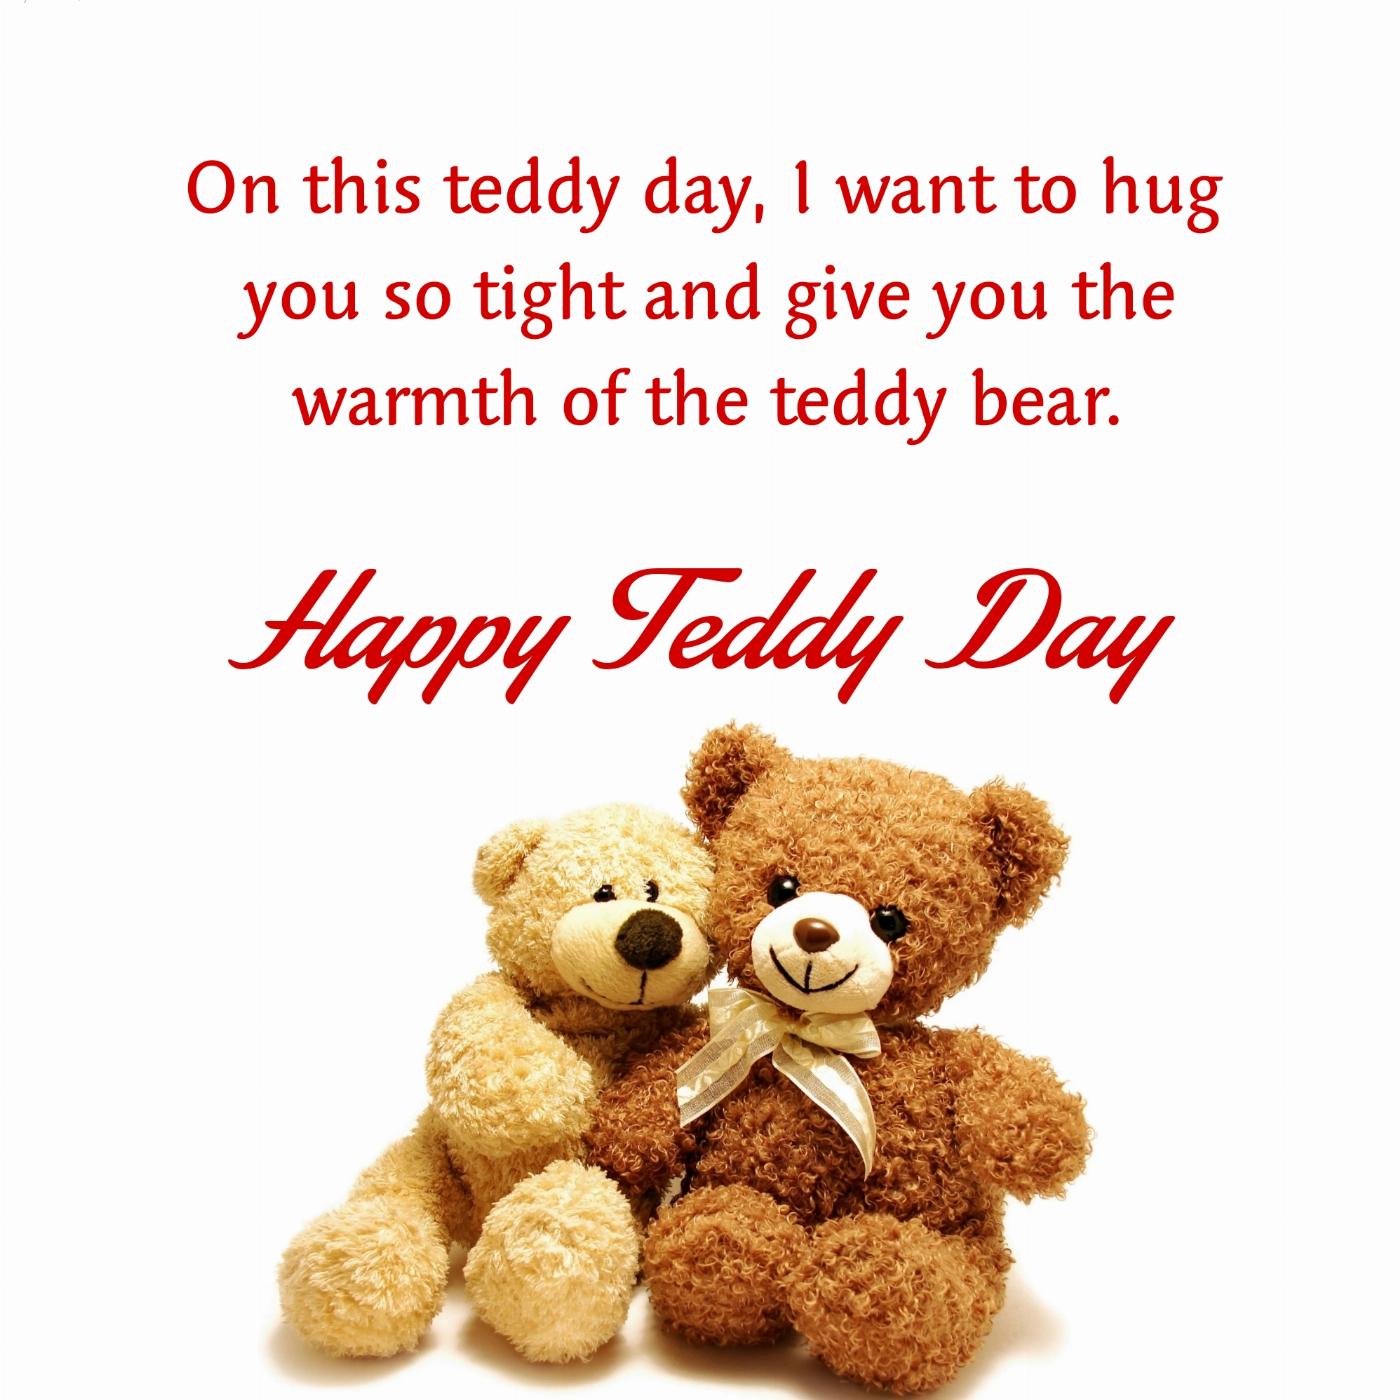 On this teddy day I want to hug you so tight